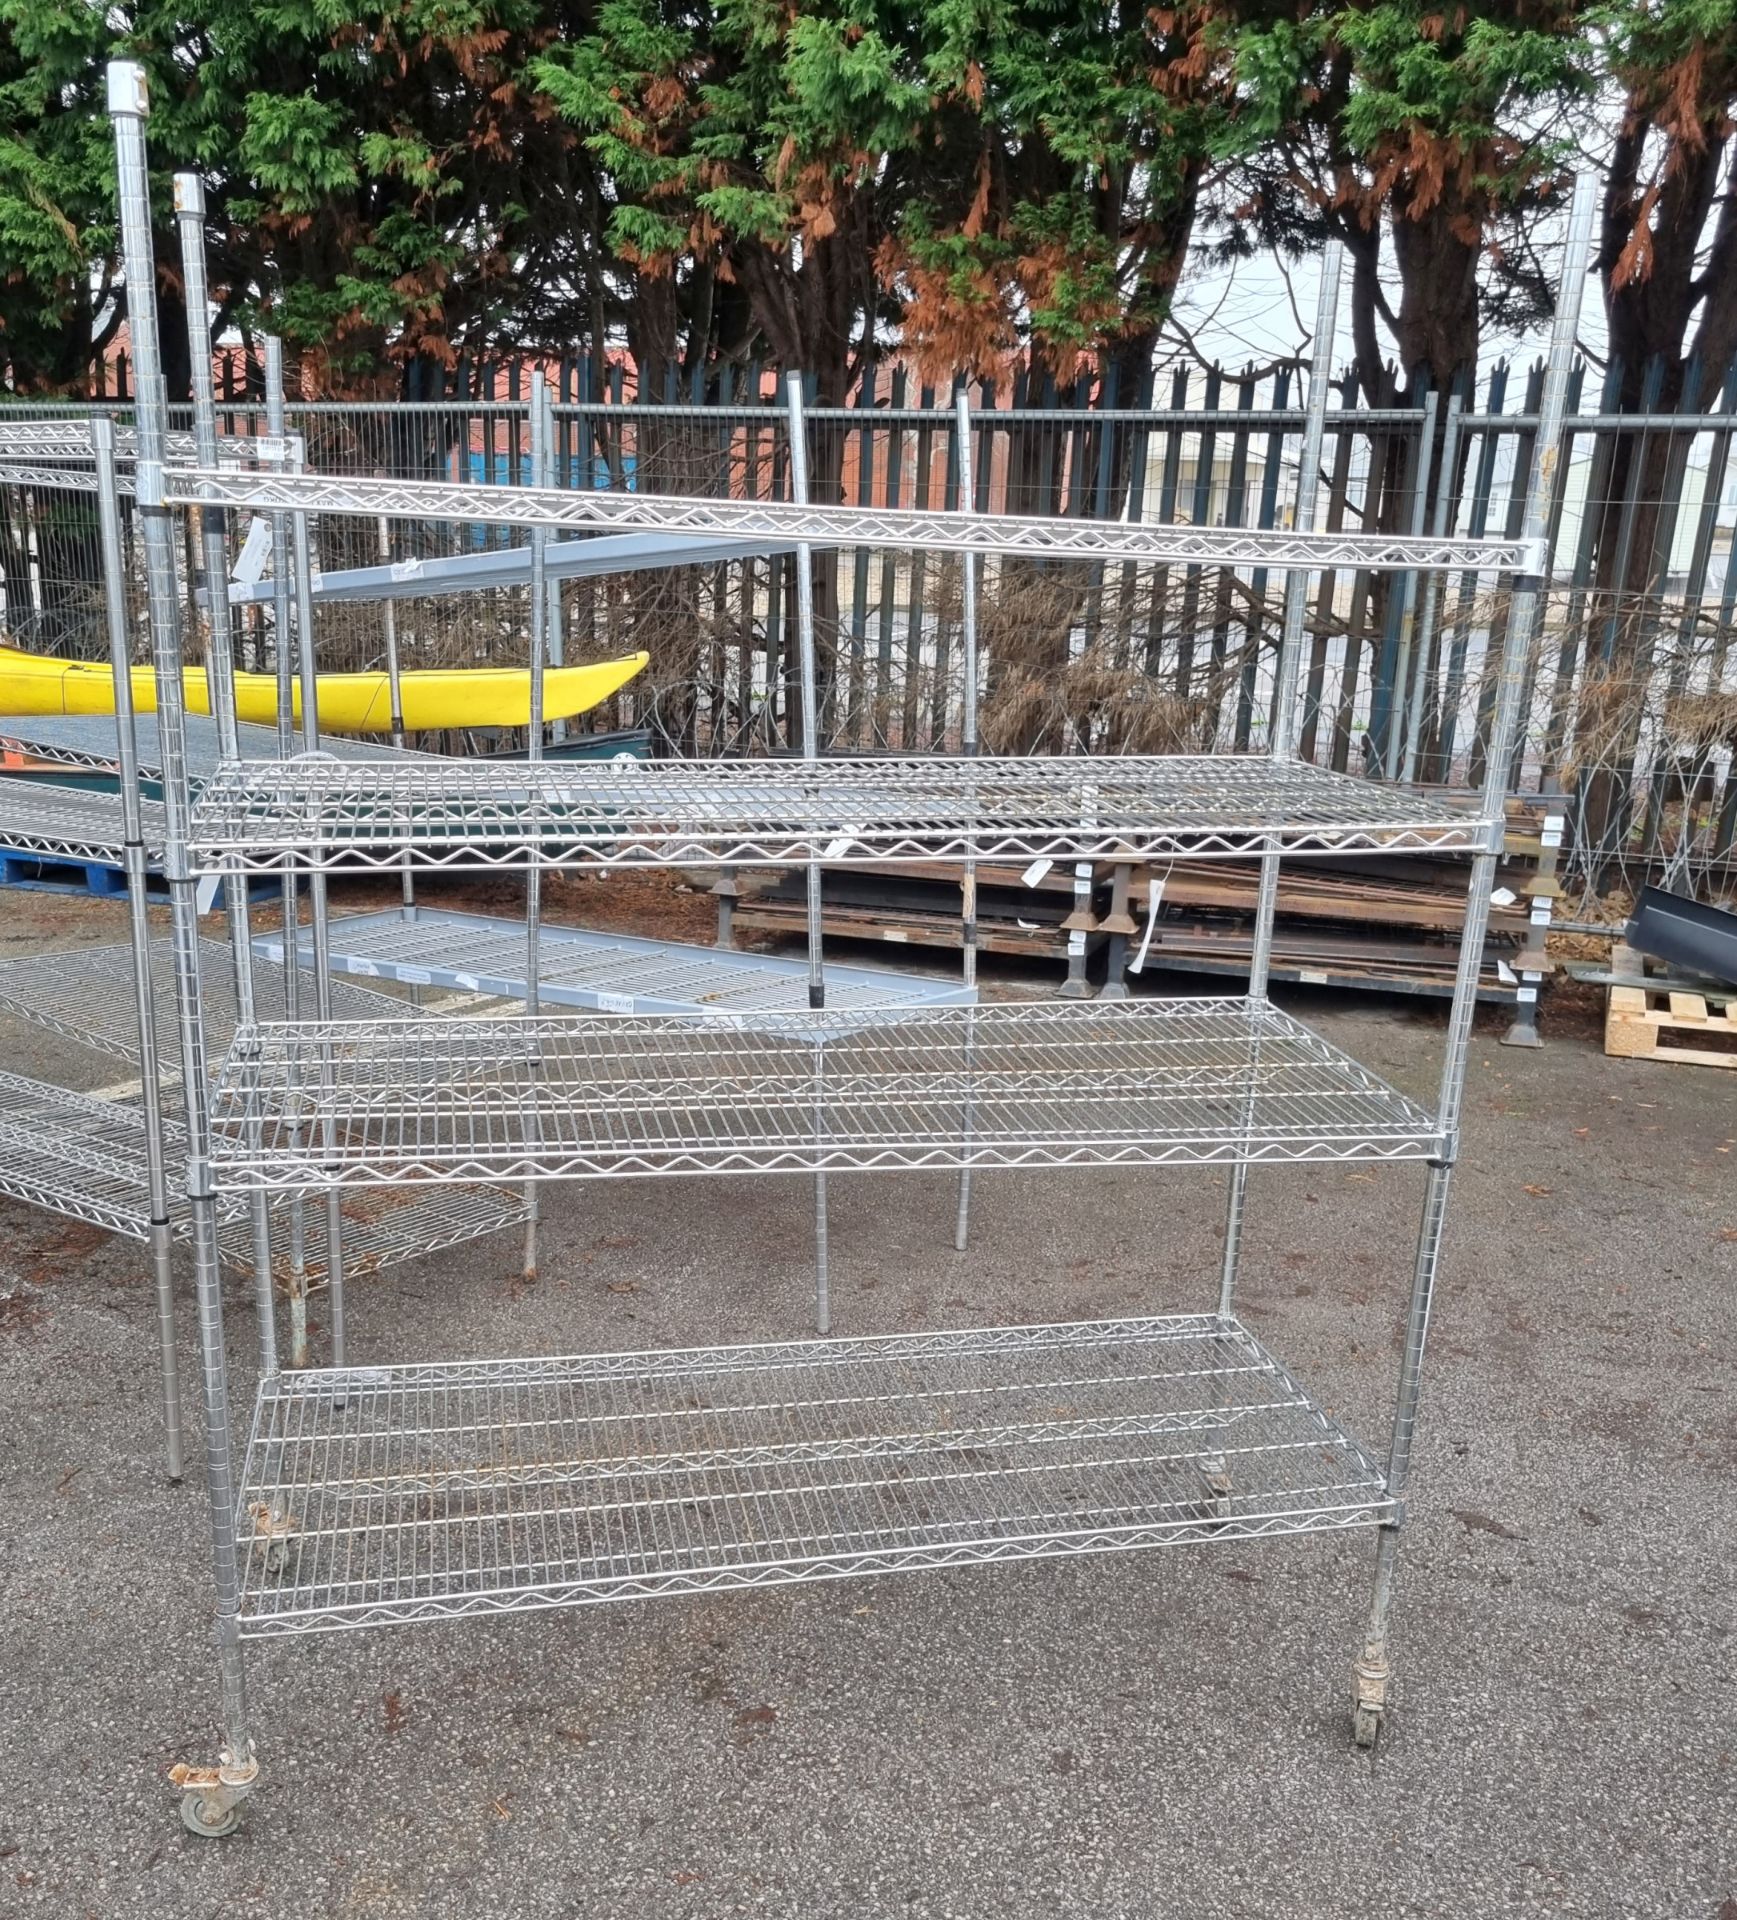 Stainless steel 4 tier wire racking - L150 x W61 x H194cm